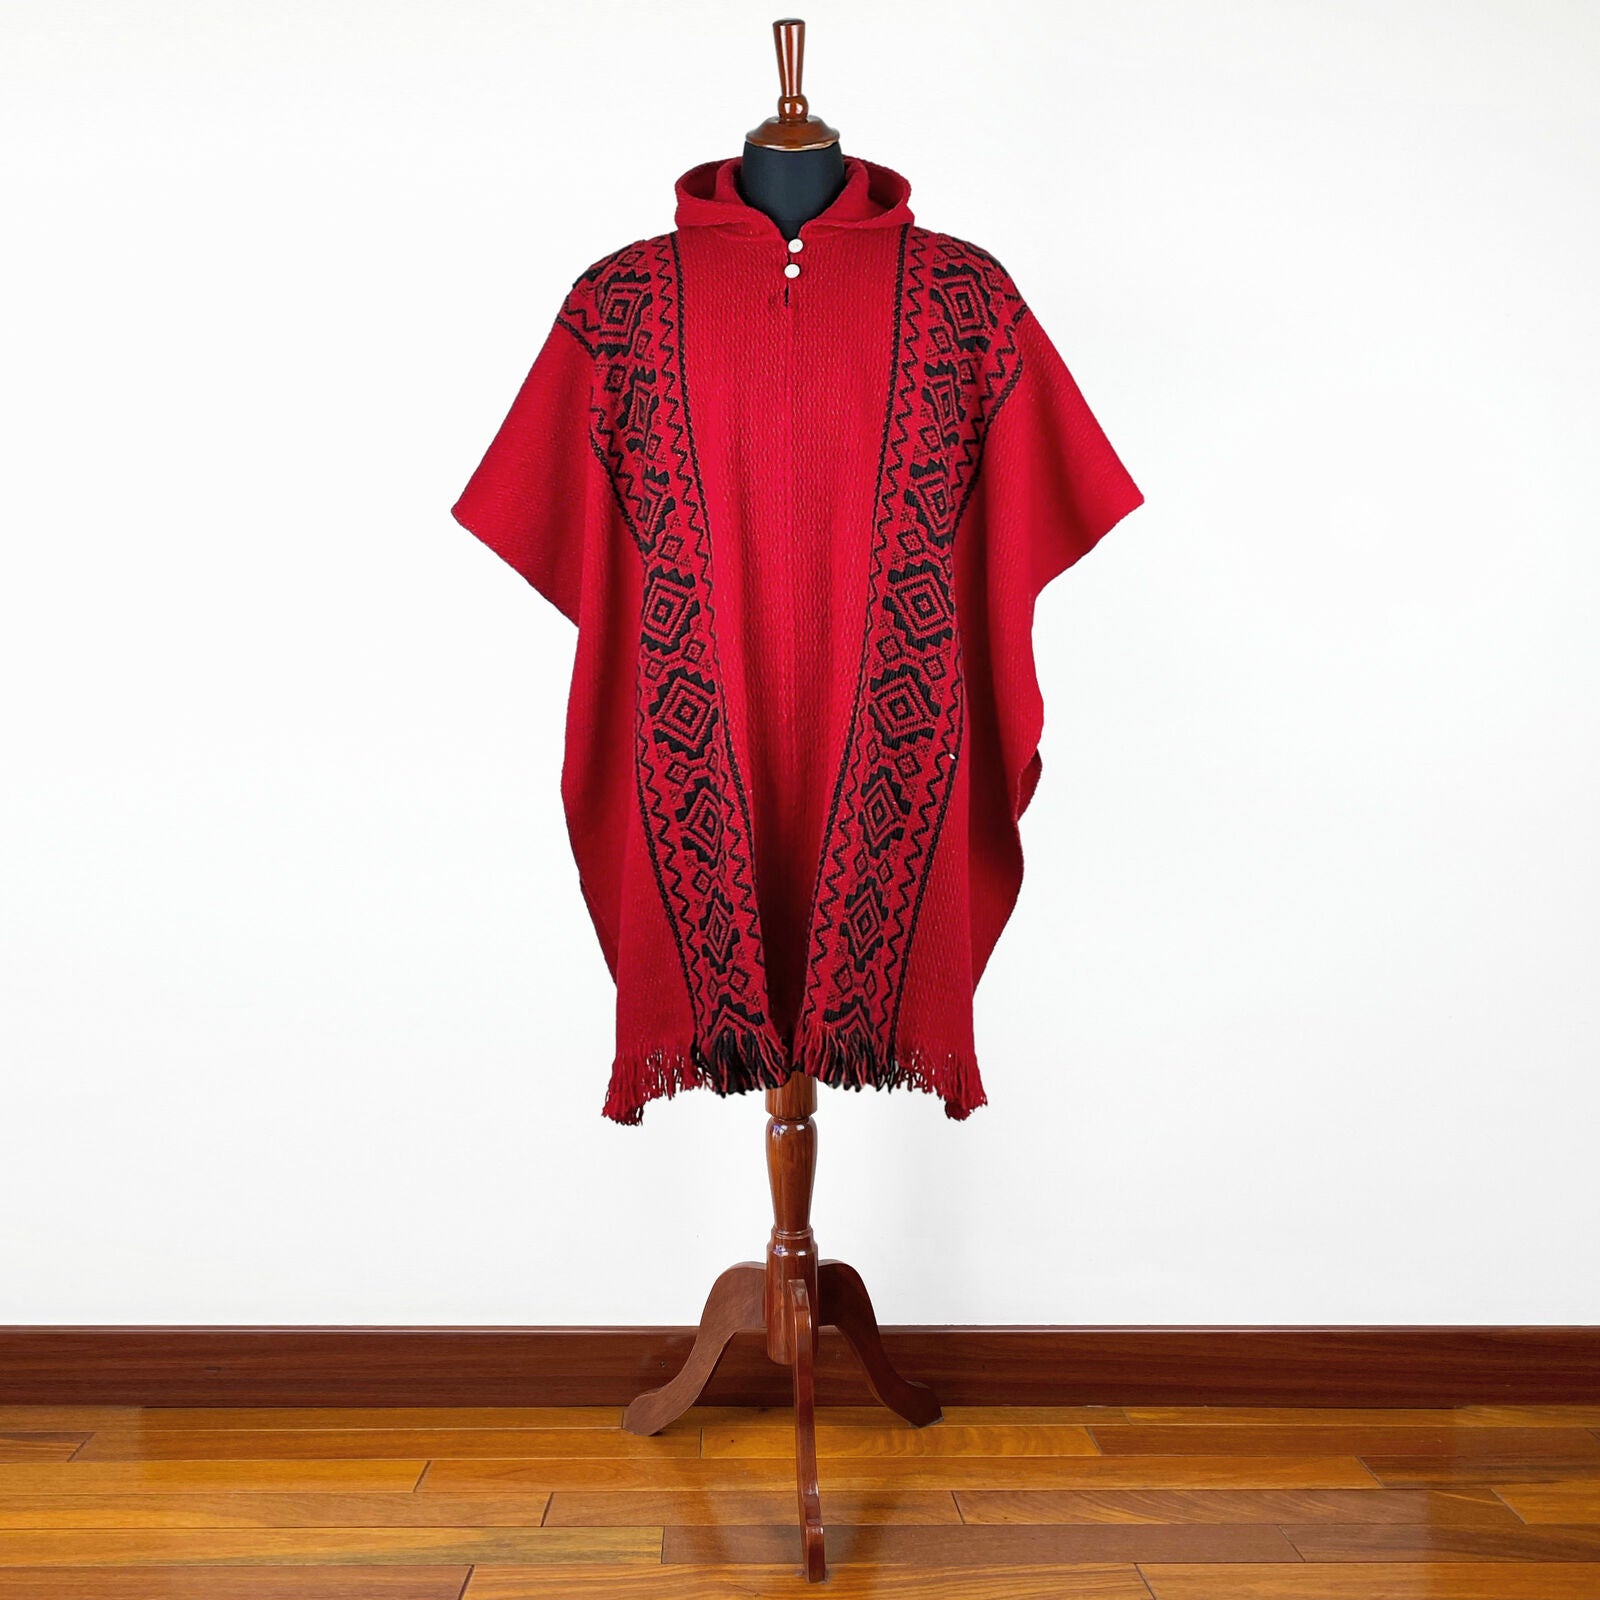 Llama Wool Unisex South American Handwoven Hooded Poncho - red with diamonds pattern